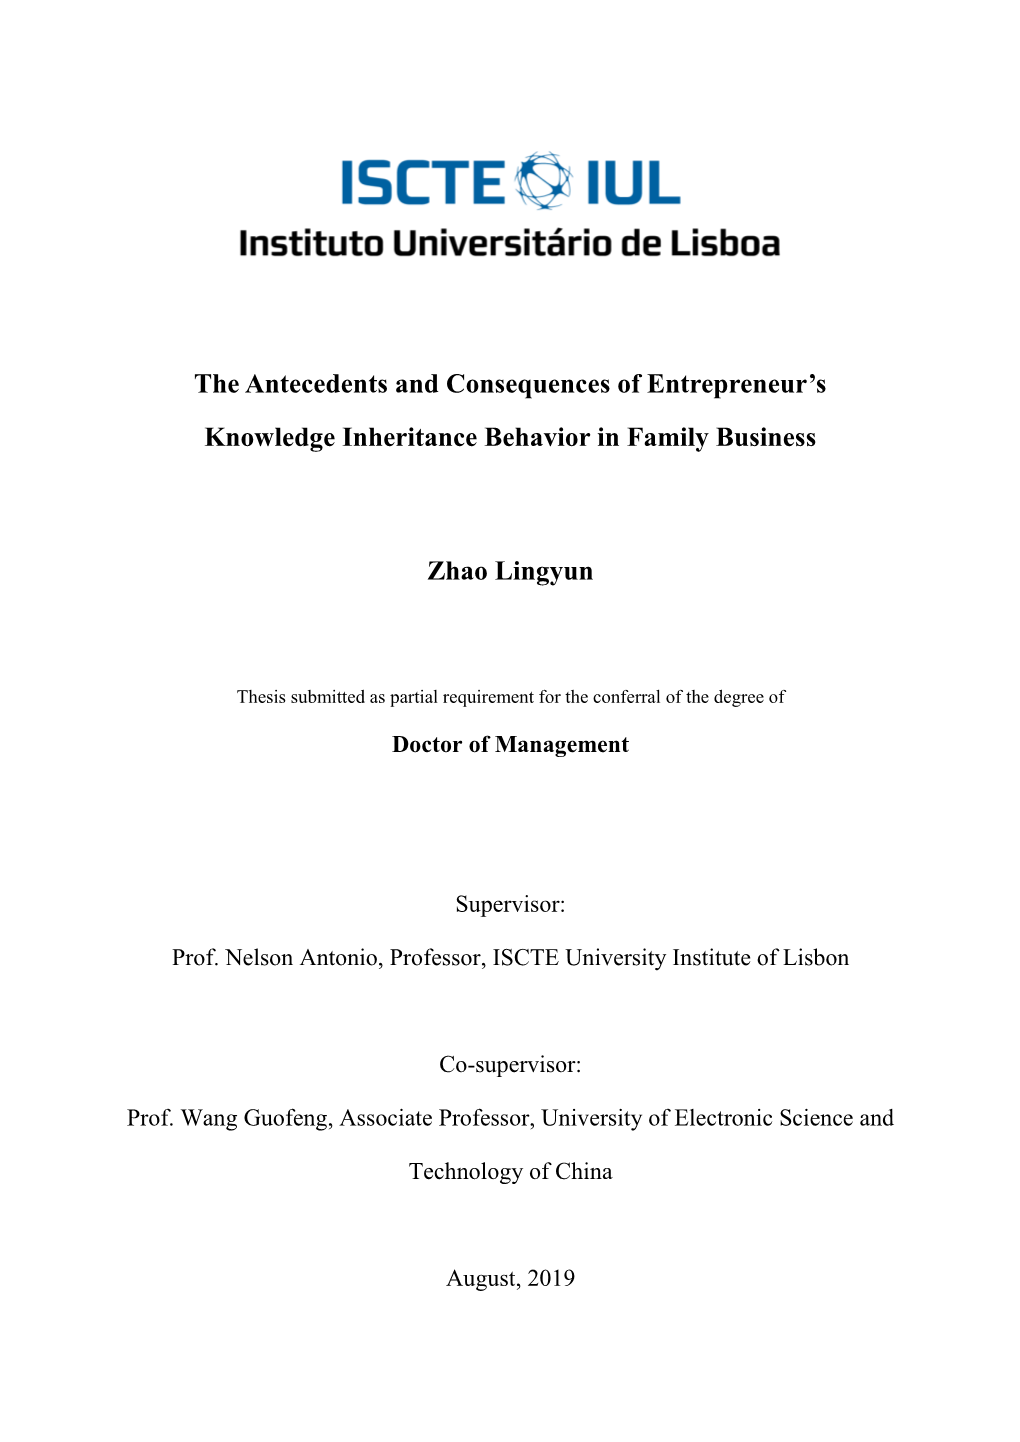 The Antecedents and Consequences of Entrepreneur's Knowledge Inheritance Behavior in Family Business Zhao Lingyun